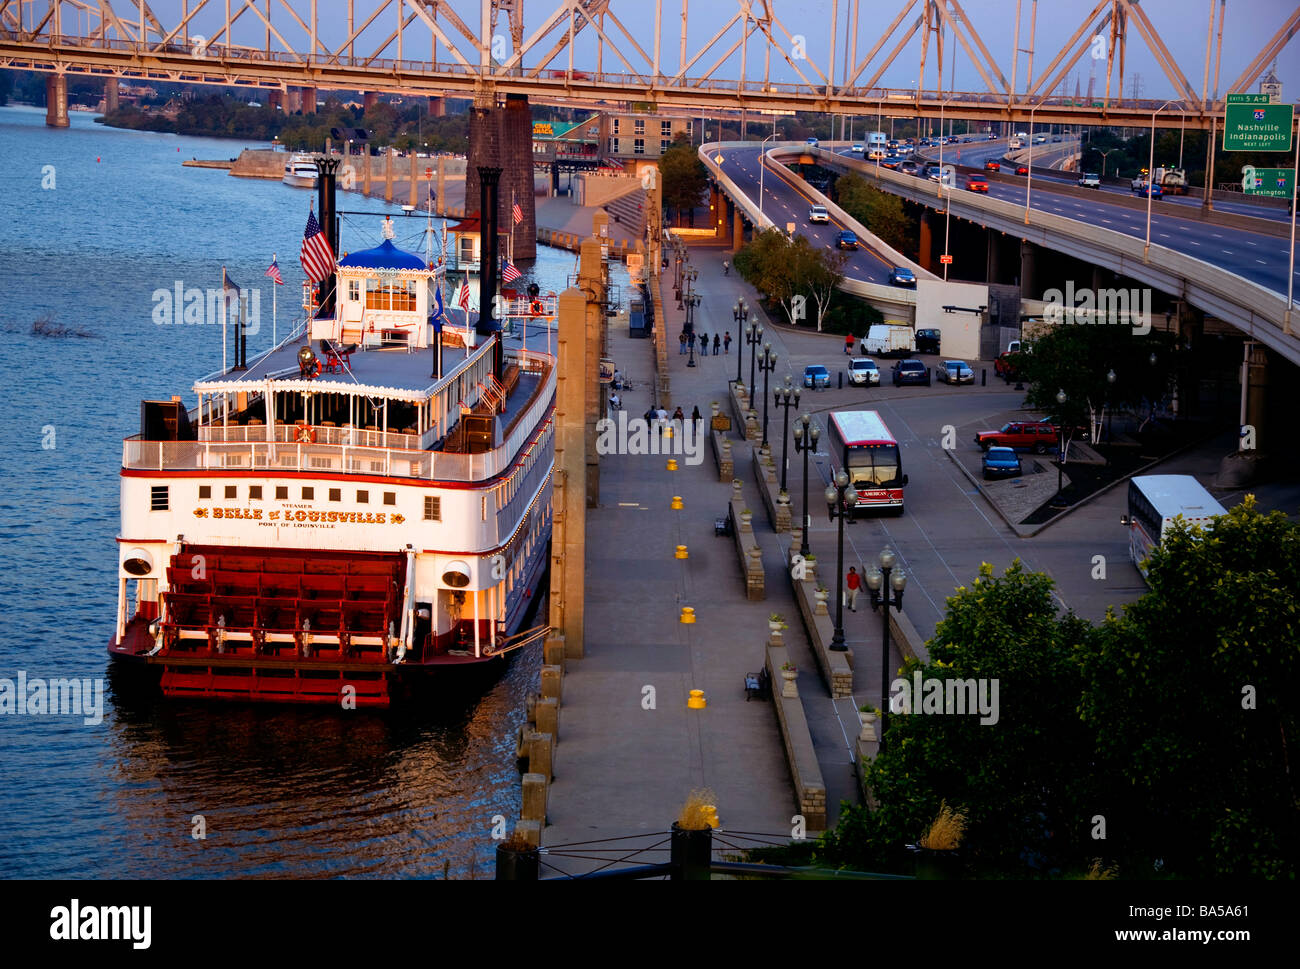 The Belle of Louisville steamship at night at Waterfront Park in Louisville, Kentucky Stock Photo